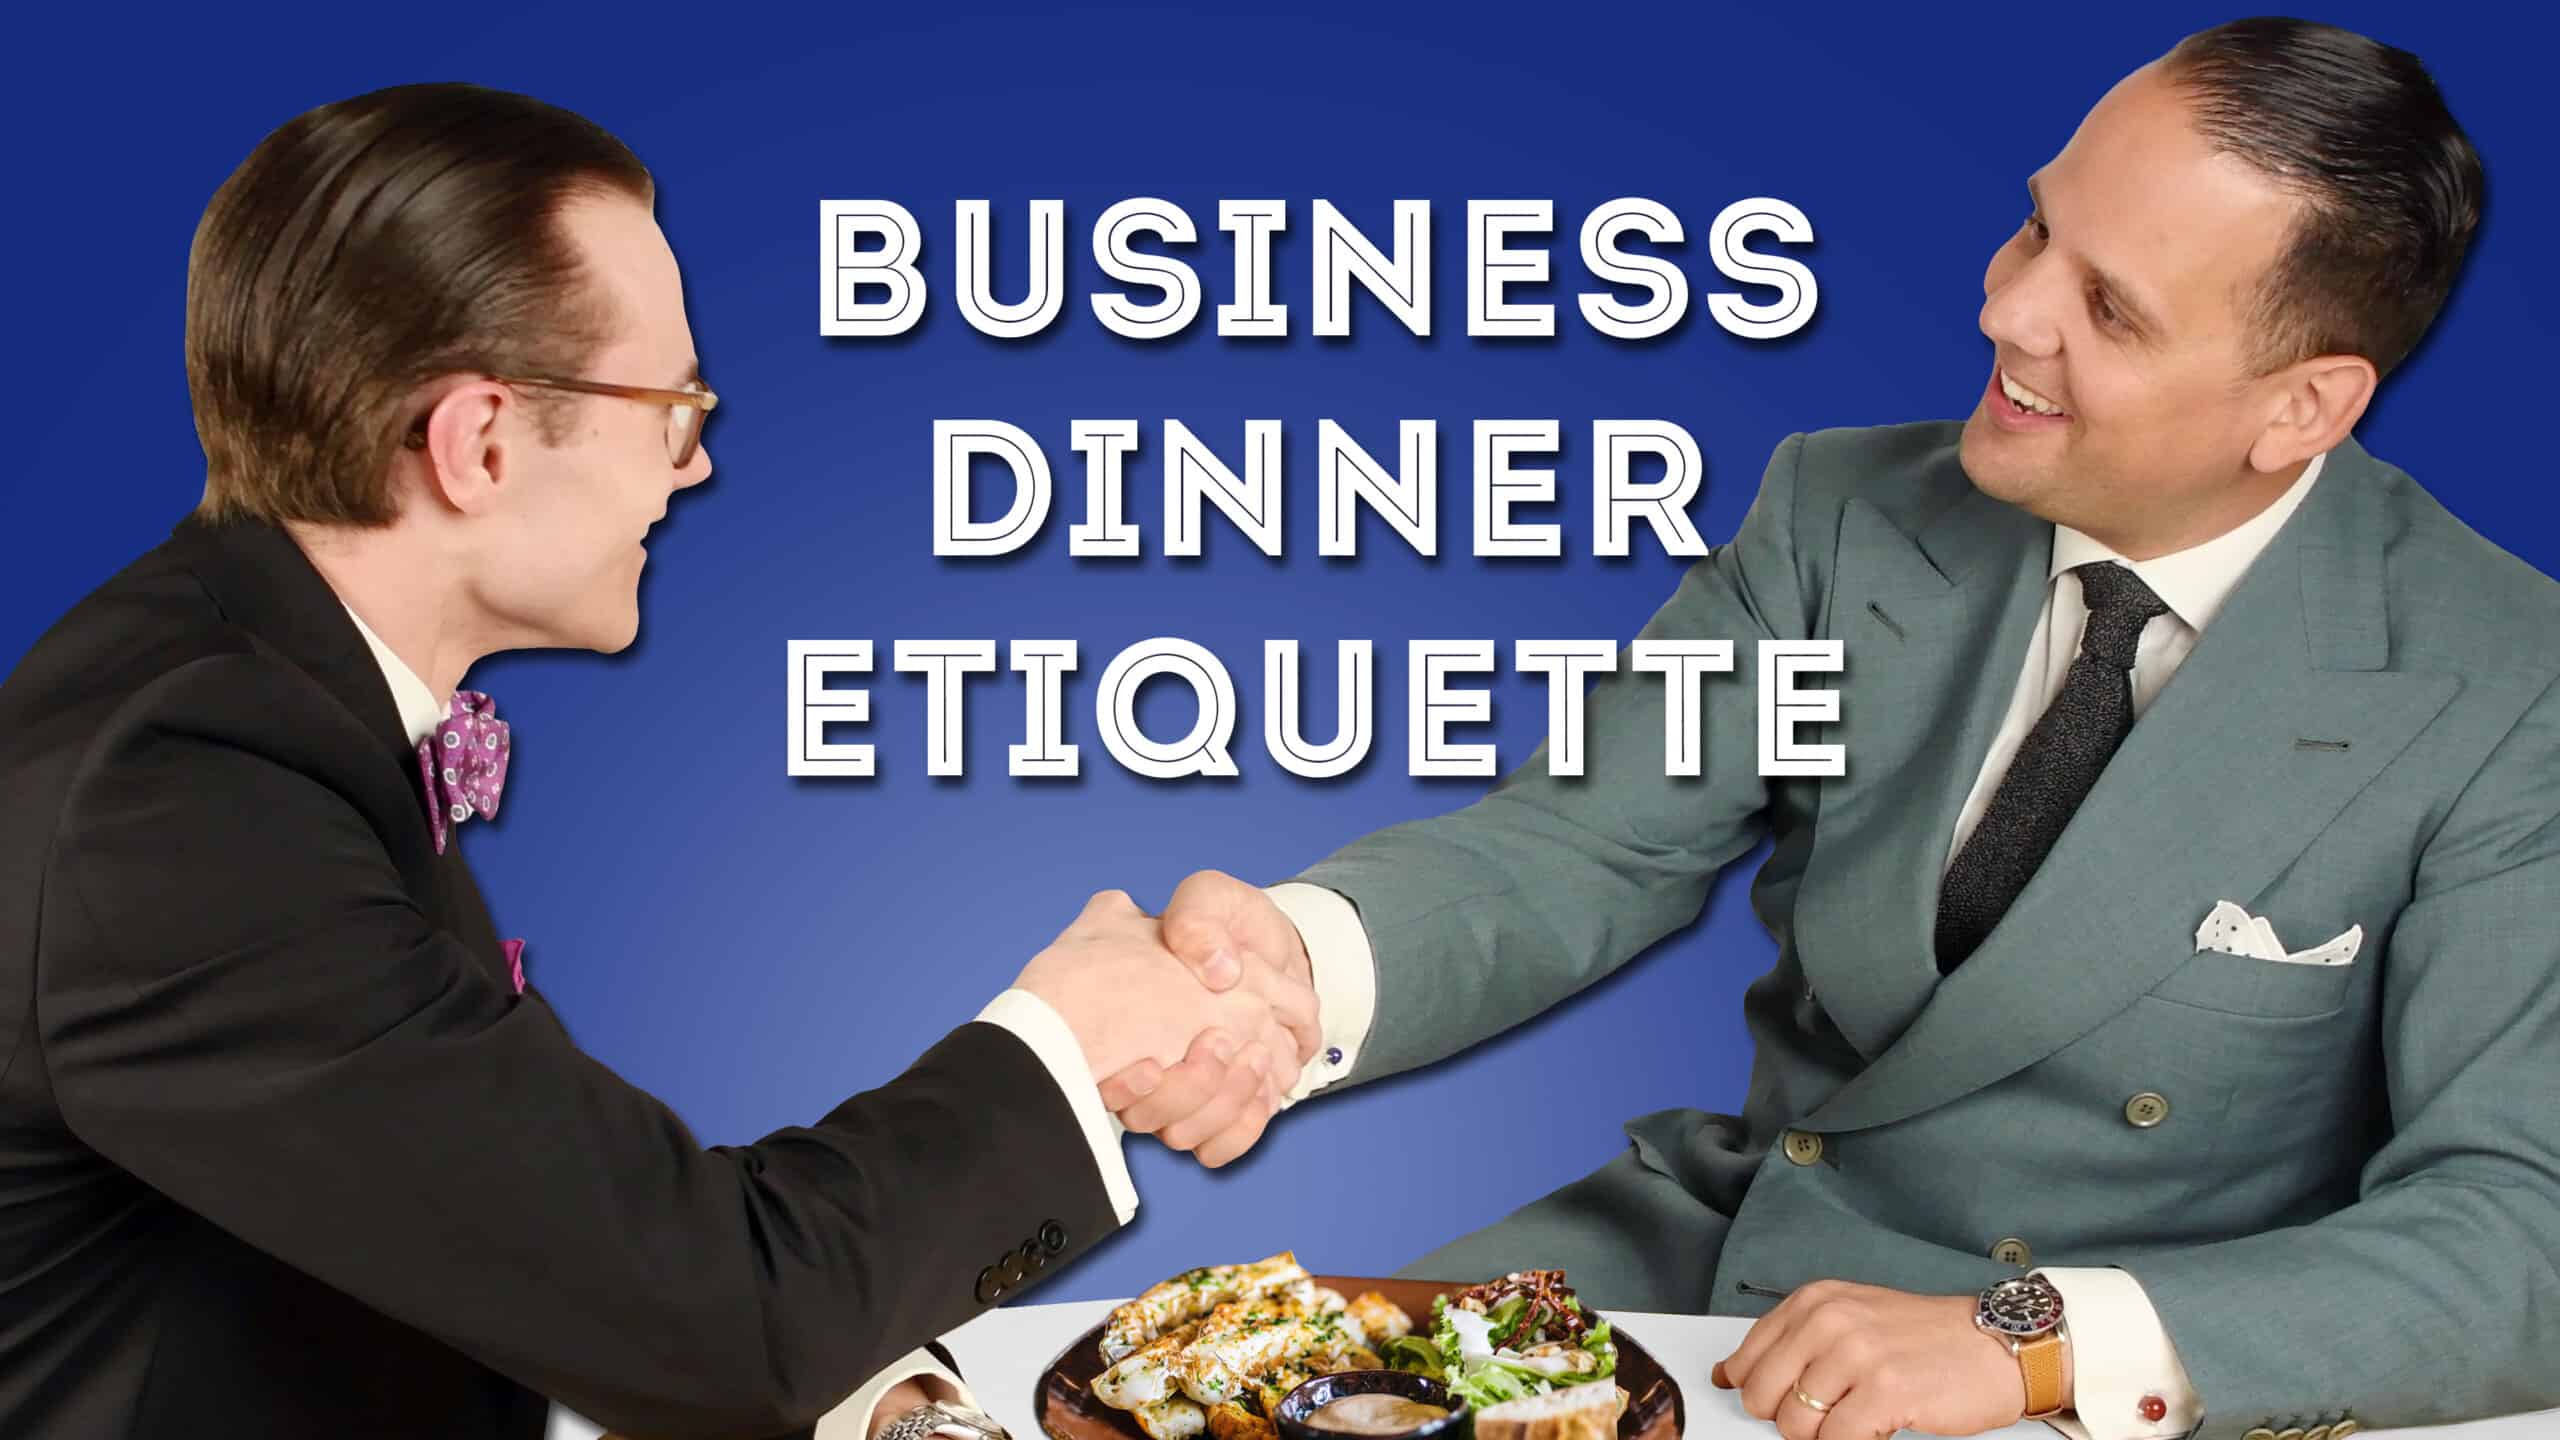 Business Dinner Etiquette Proper Manners For Dining With Clients